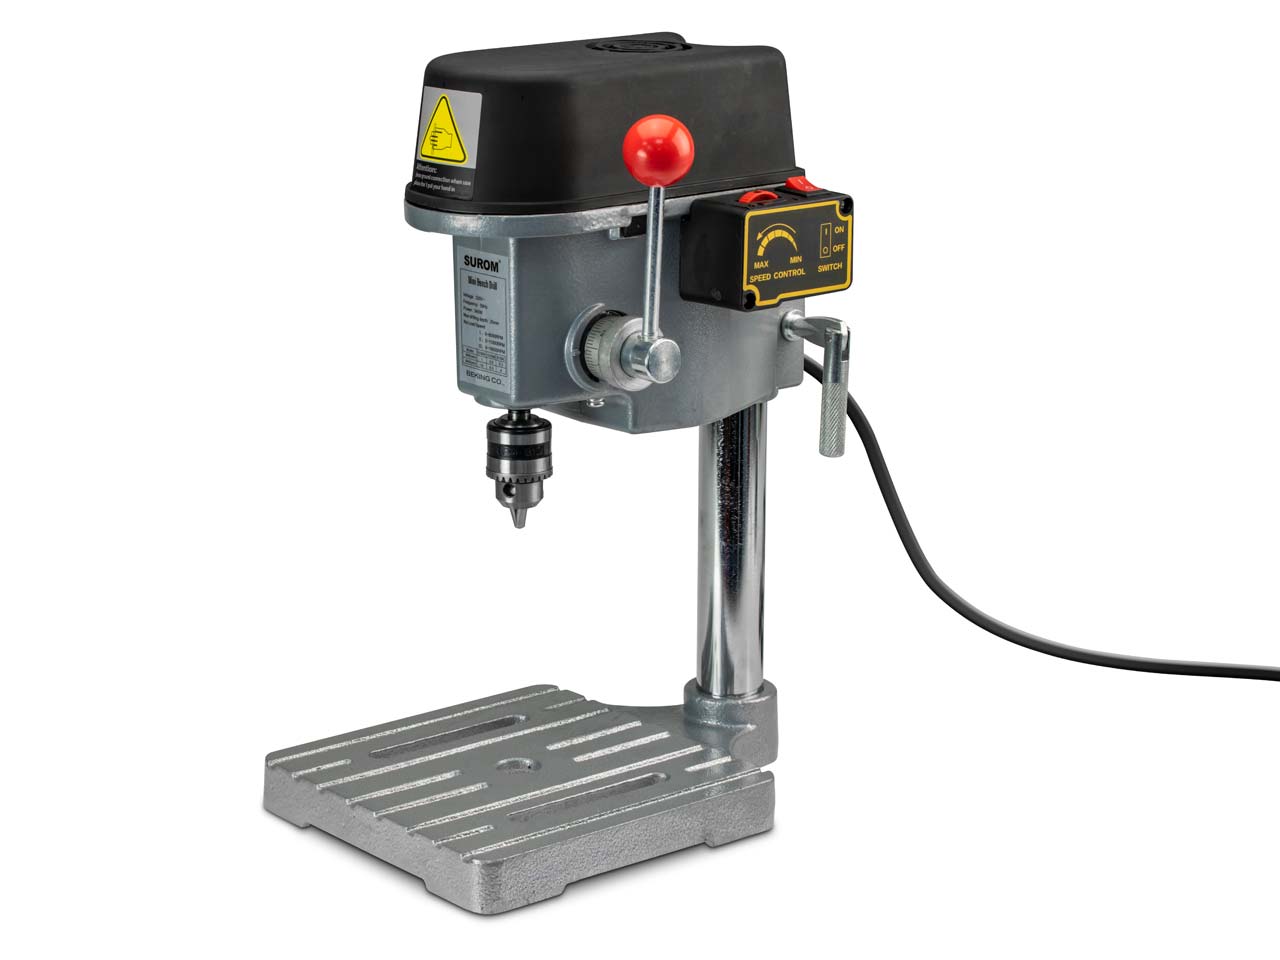 Mini Benchtop Drill Press Questions & Answers